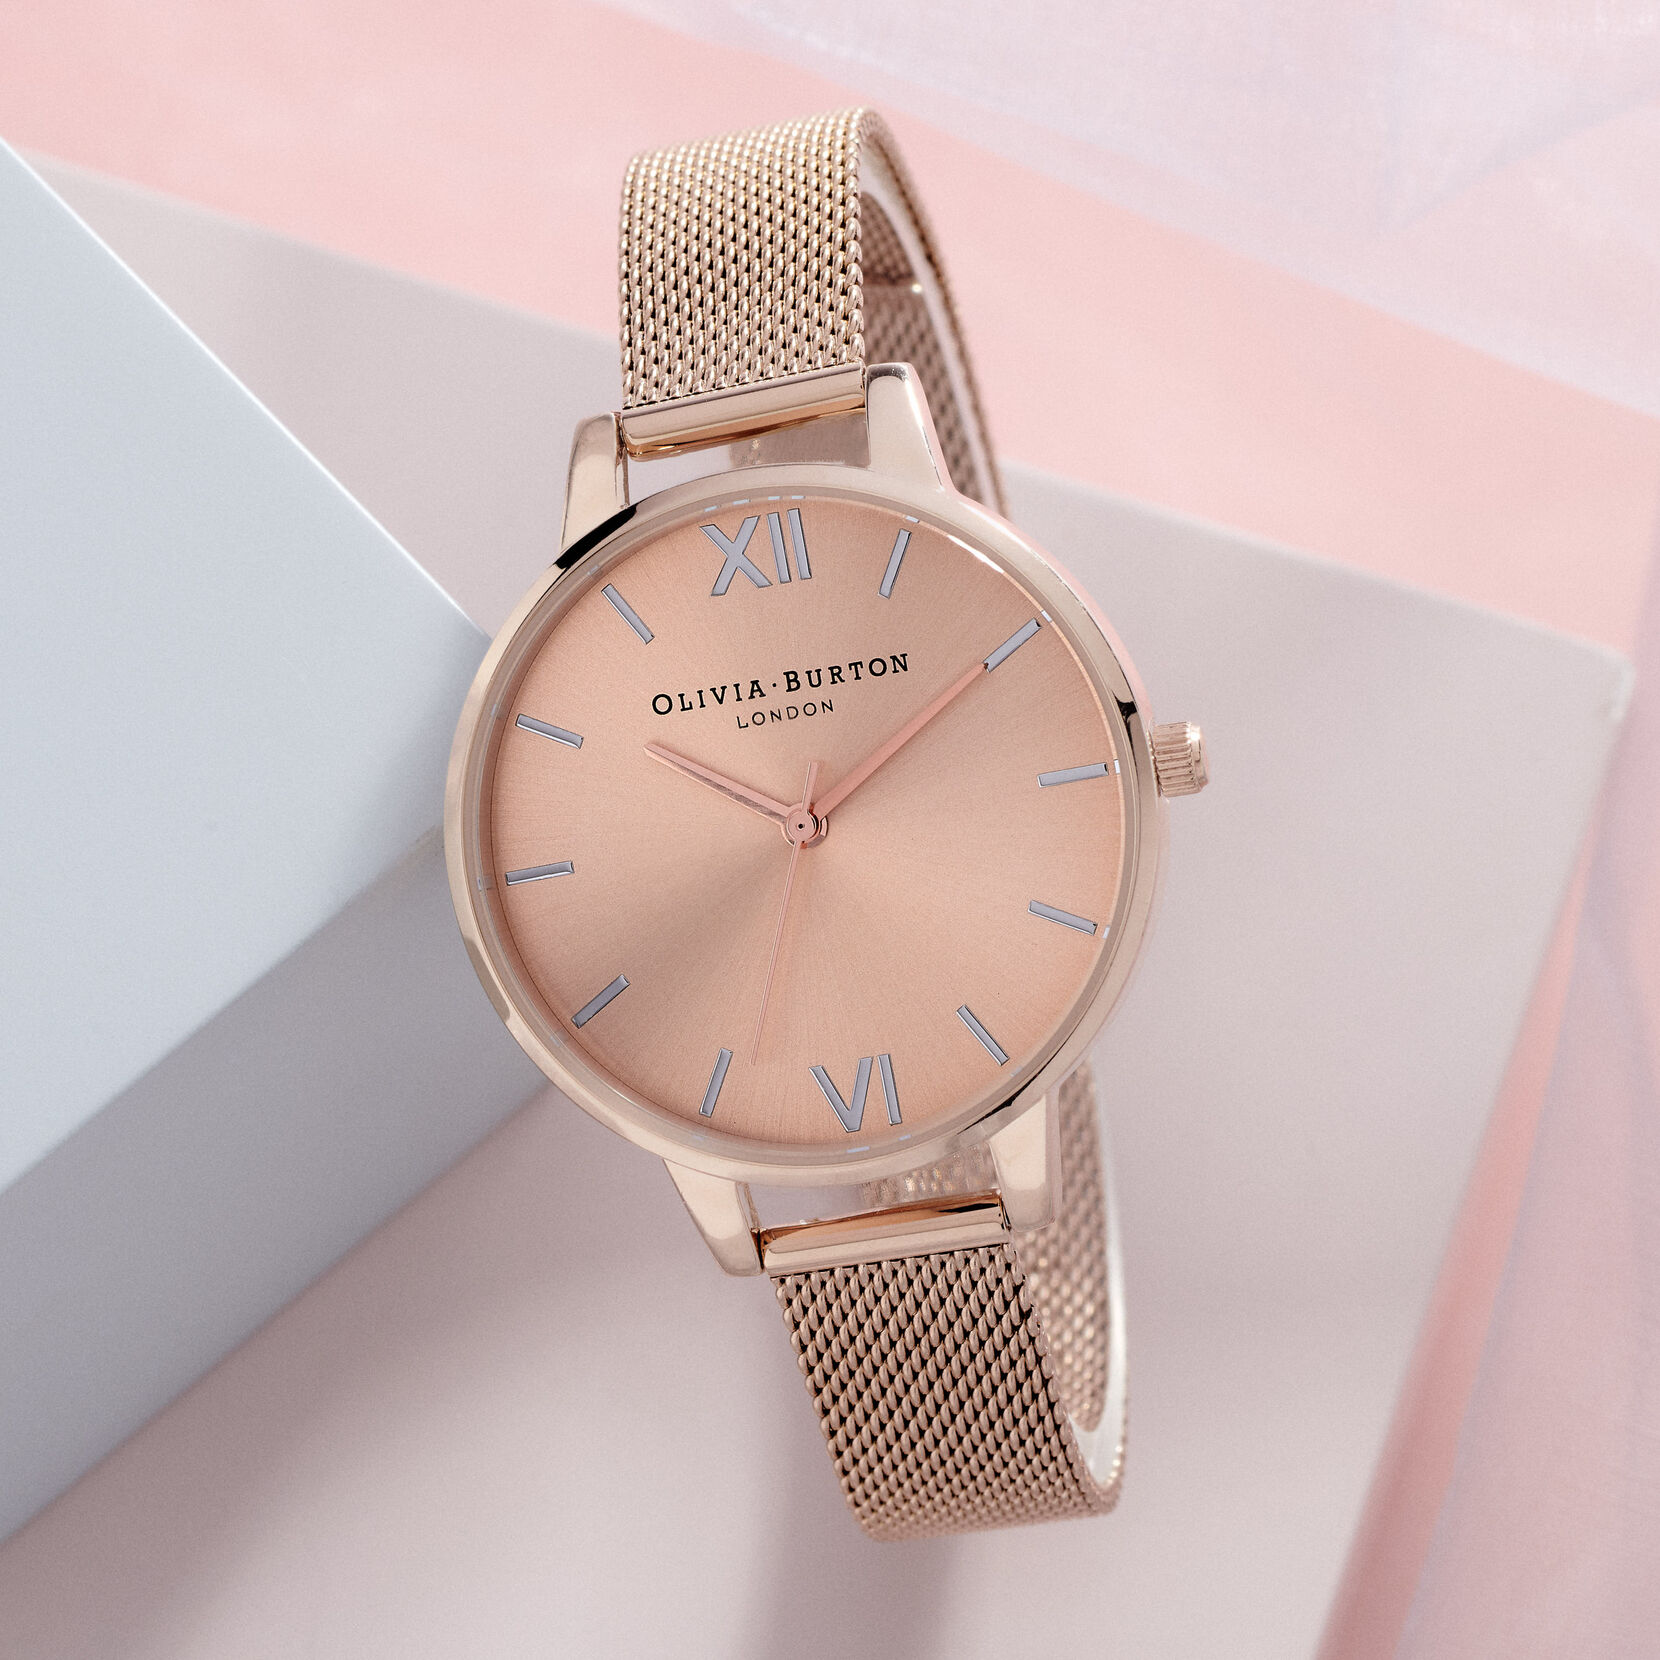 Demi Dial Thin Case Pale Rose Gold Mesh Watch